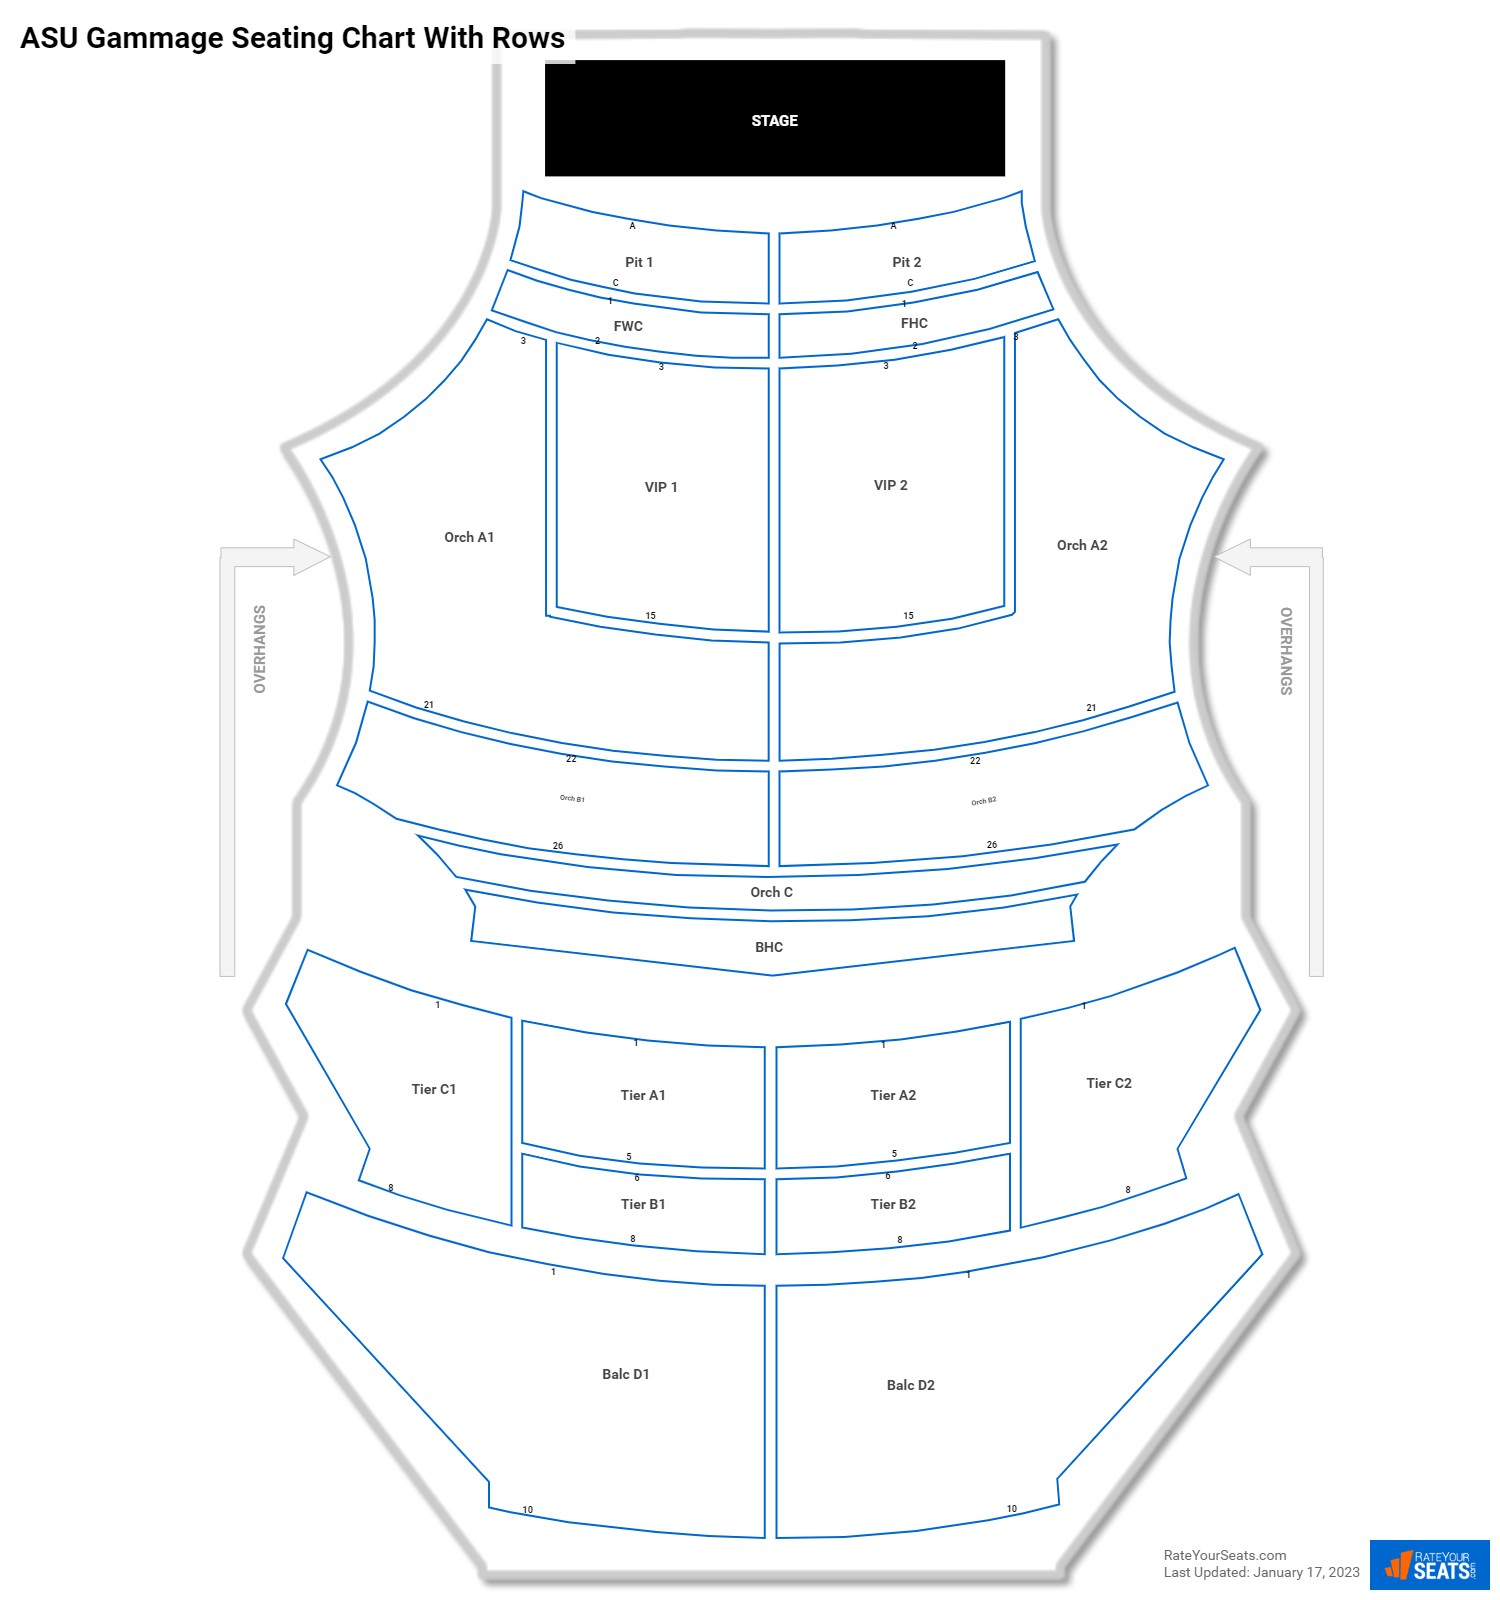 ASU Gammage seating chart with row numbers